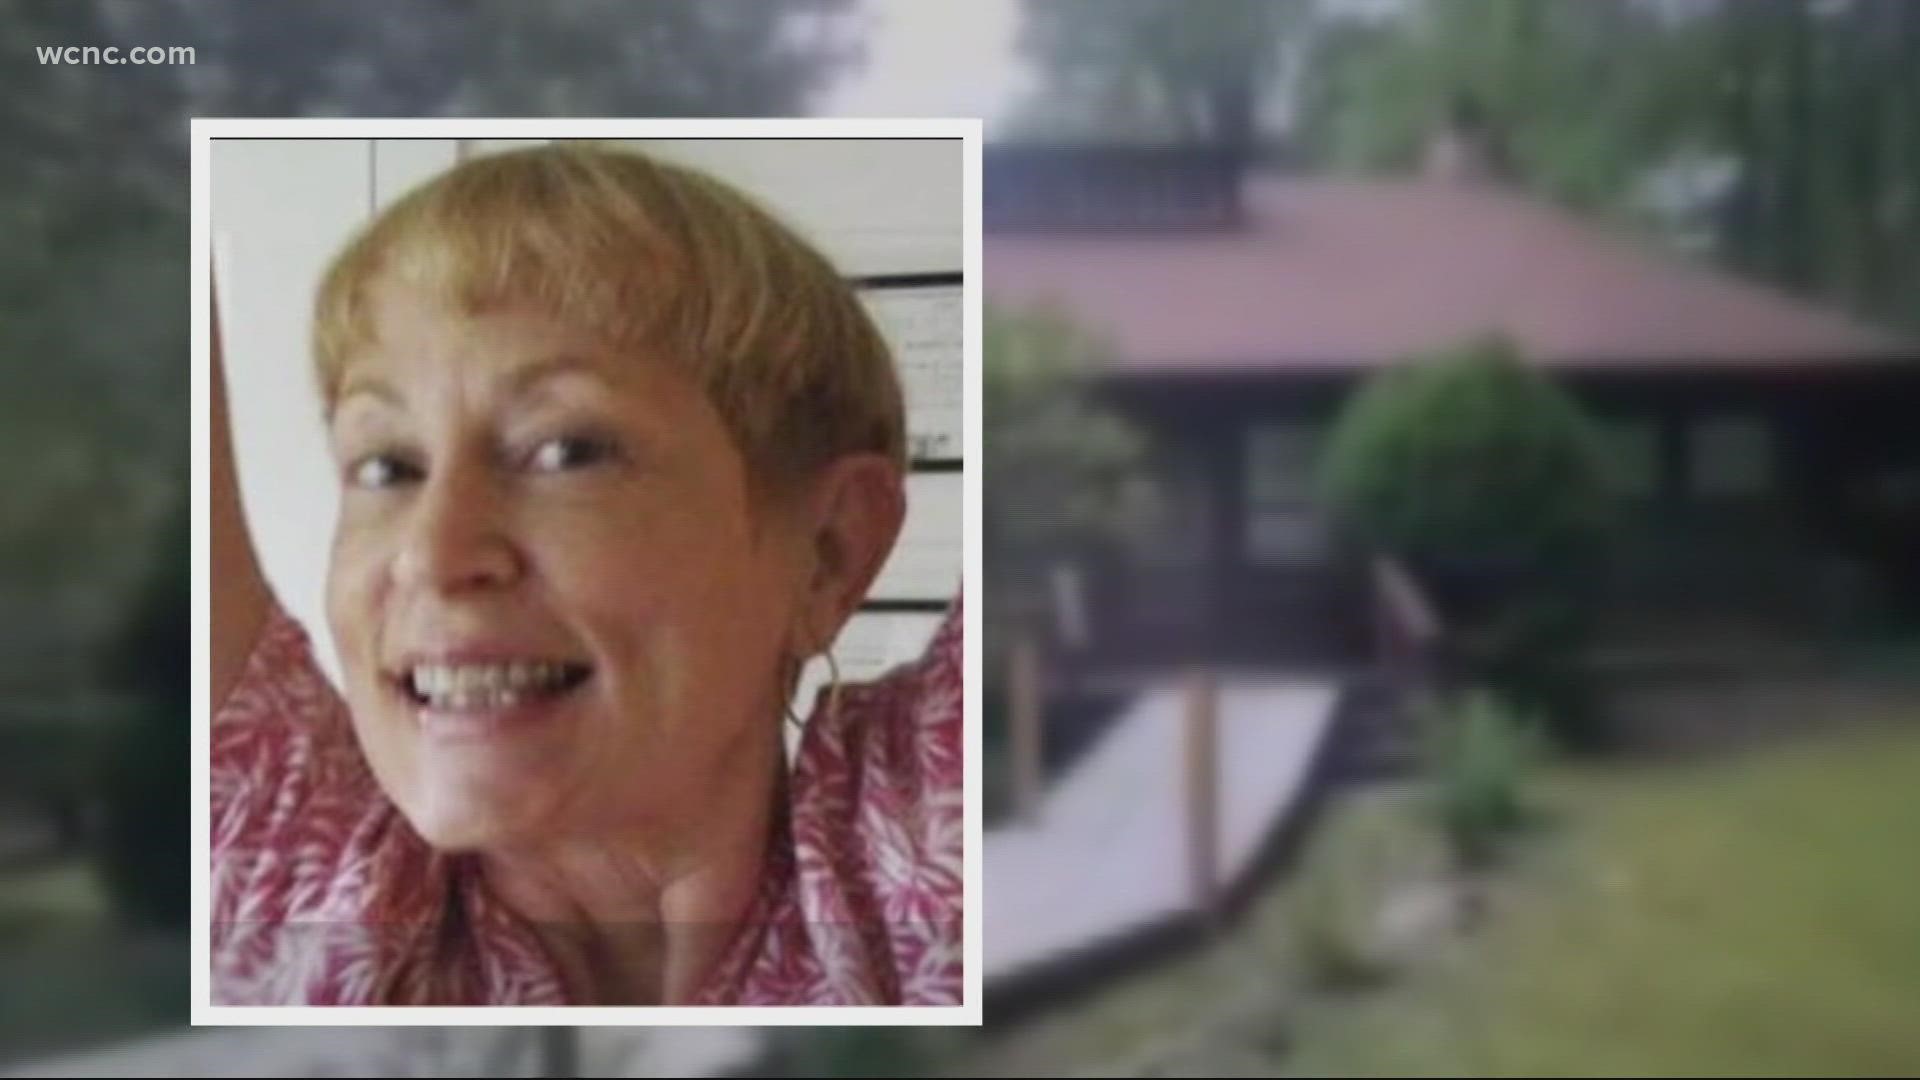 The Avery County Sheriff's office said they have arrested and charged a caregiver with the murder of 70-year-old Lynn Keene.